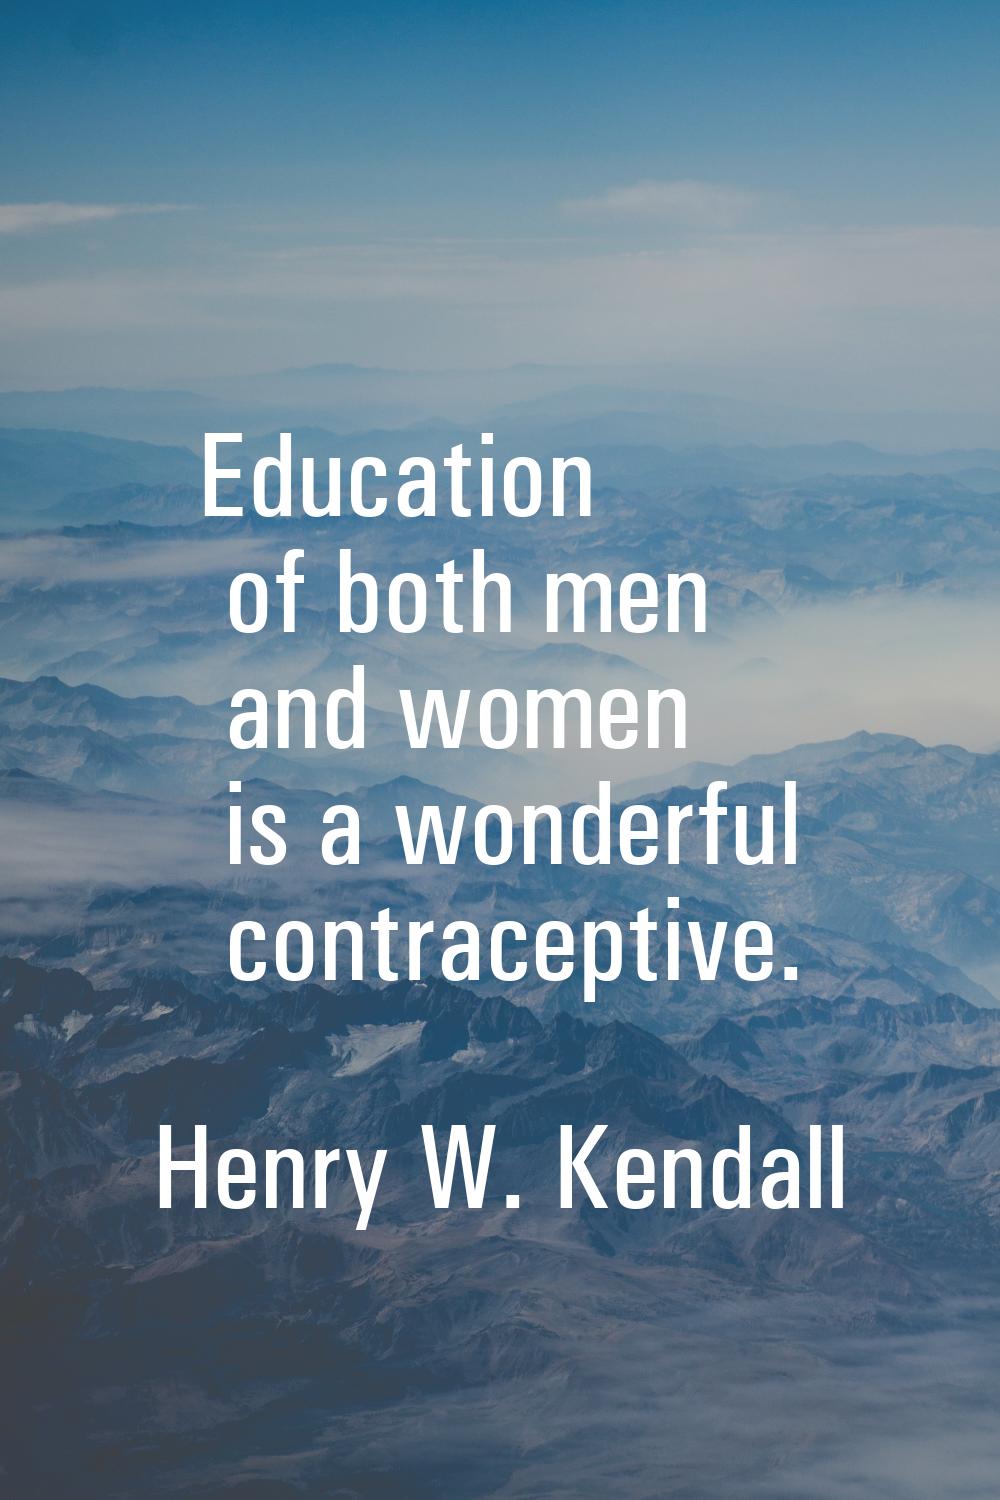 Education of both men and women is a wonderful contraceptive.